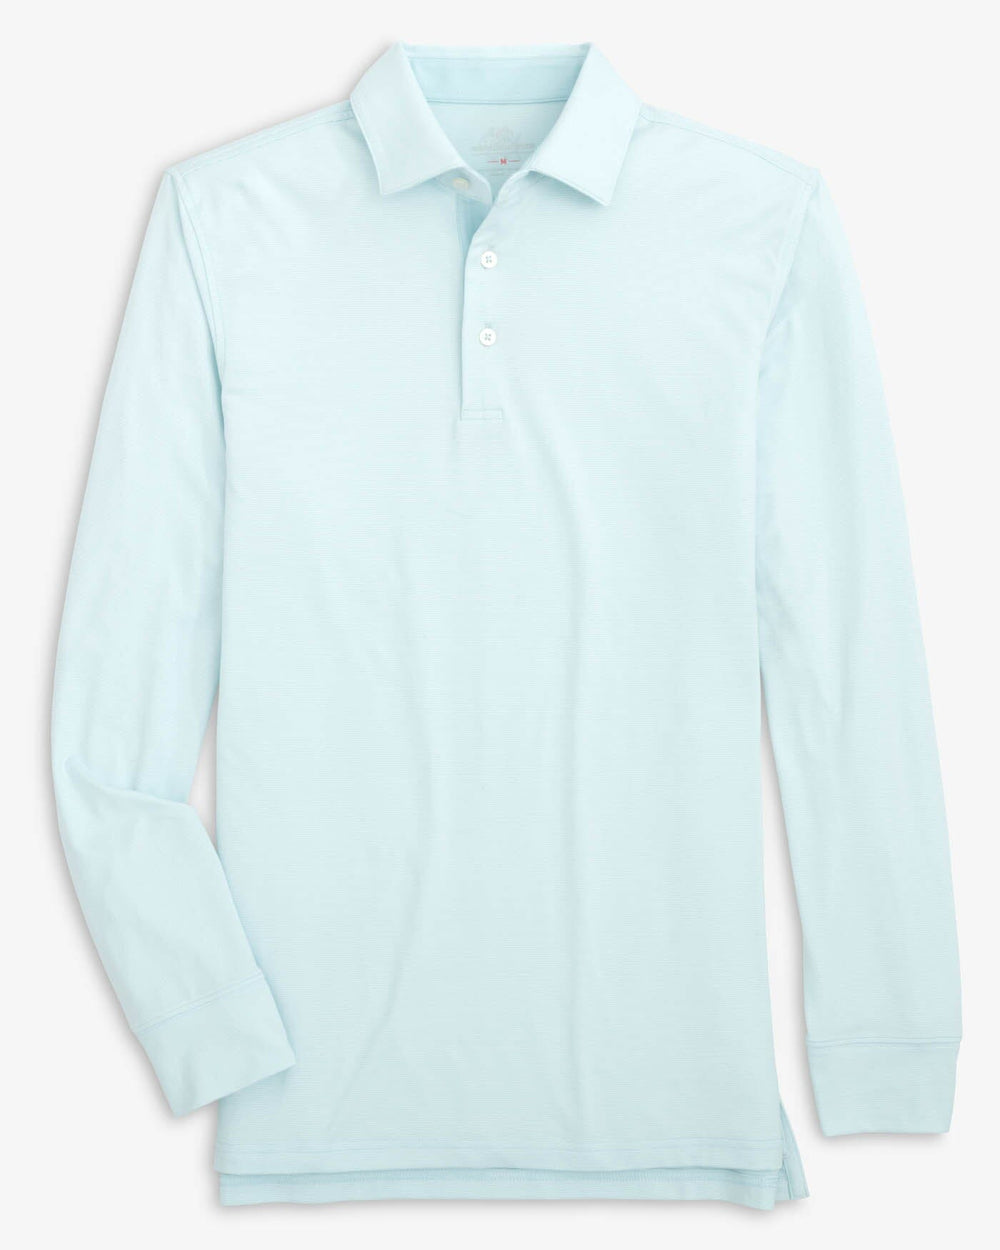 The front view of the Southern Tide Ryder Heather Ridgeway Stripe Long Sleeve Performance Polo by Southern Tide - Heather Cloud White